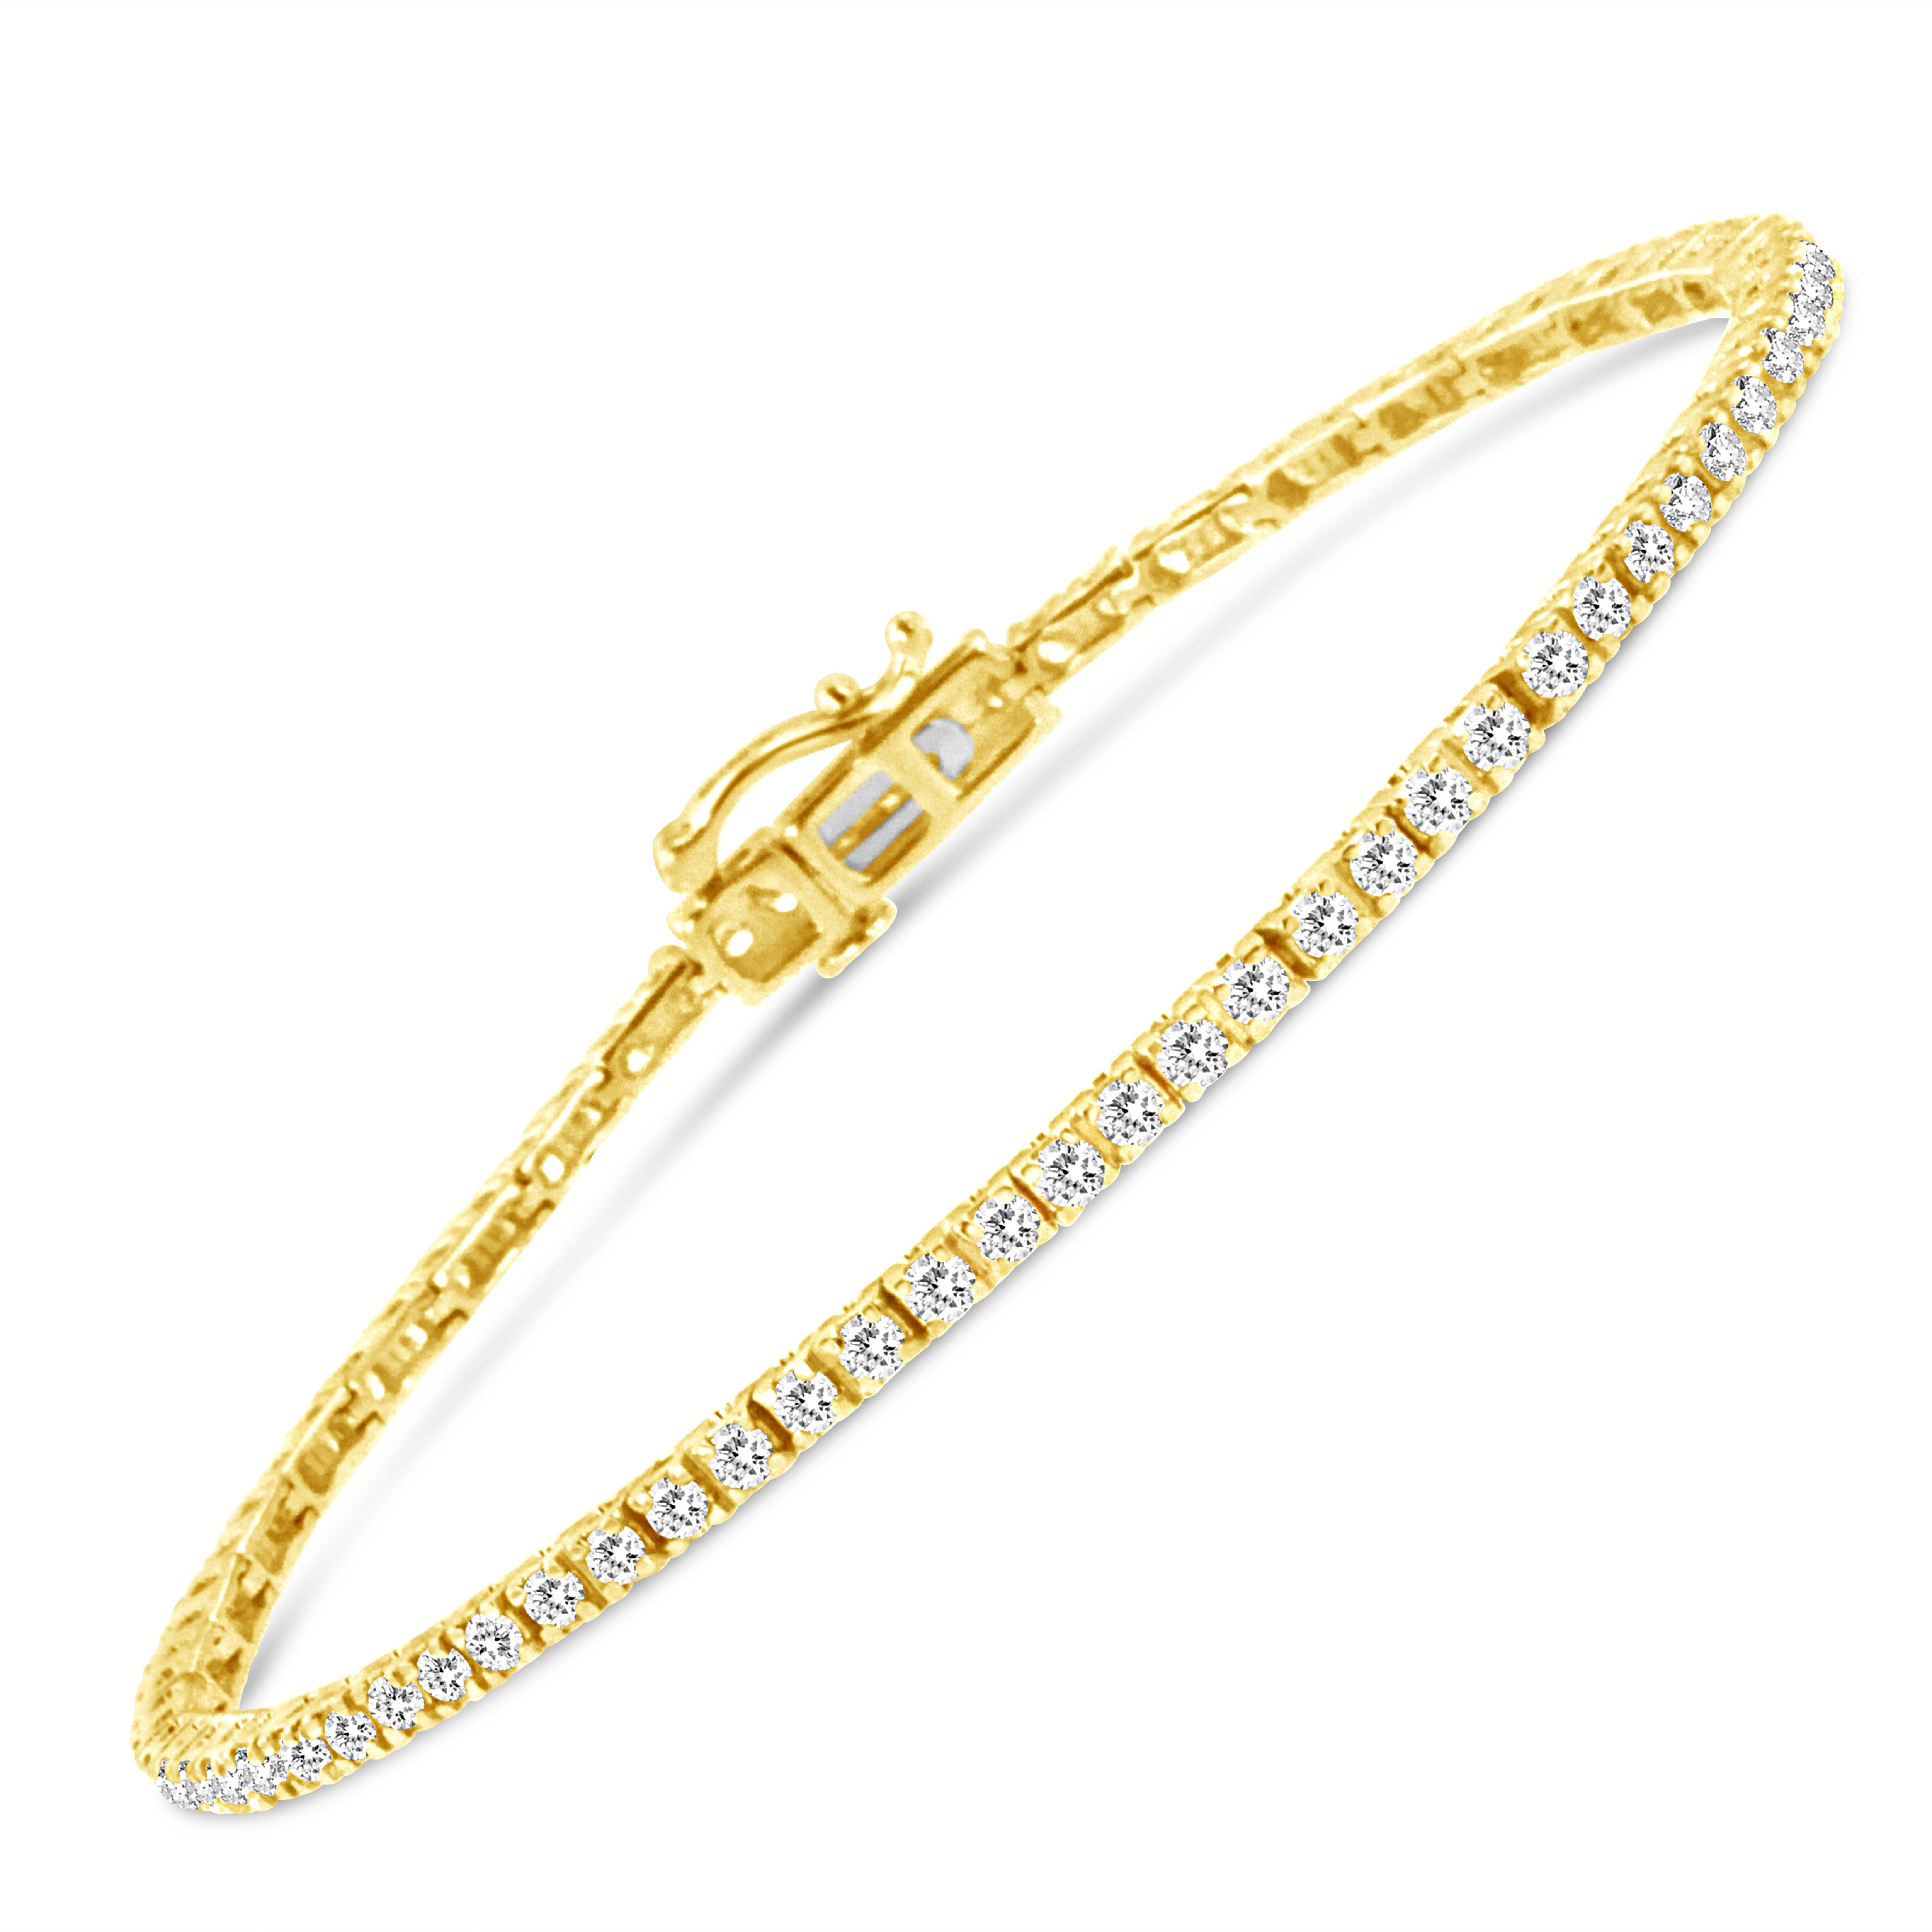 A story of pure elegance, this classic diamond tennis bracelet showcases brilliant diamonds that are set in an enduring 14k yellow gold plated .925 sterling silver. This classic and elegant tennis bracelet has a dramatic shimmery appearance with a